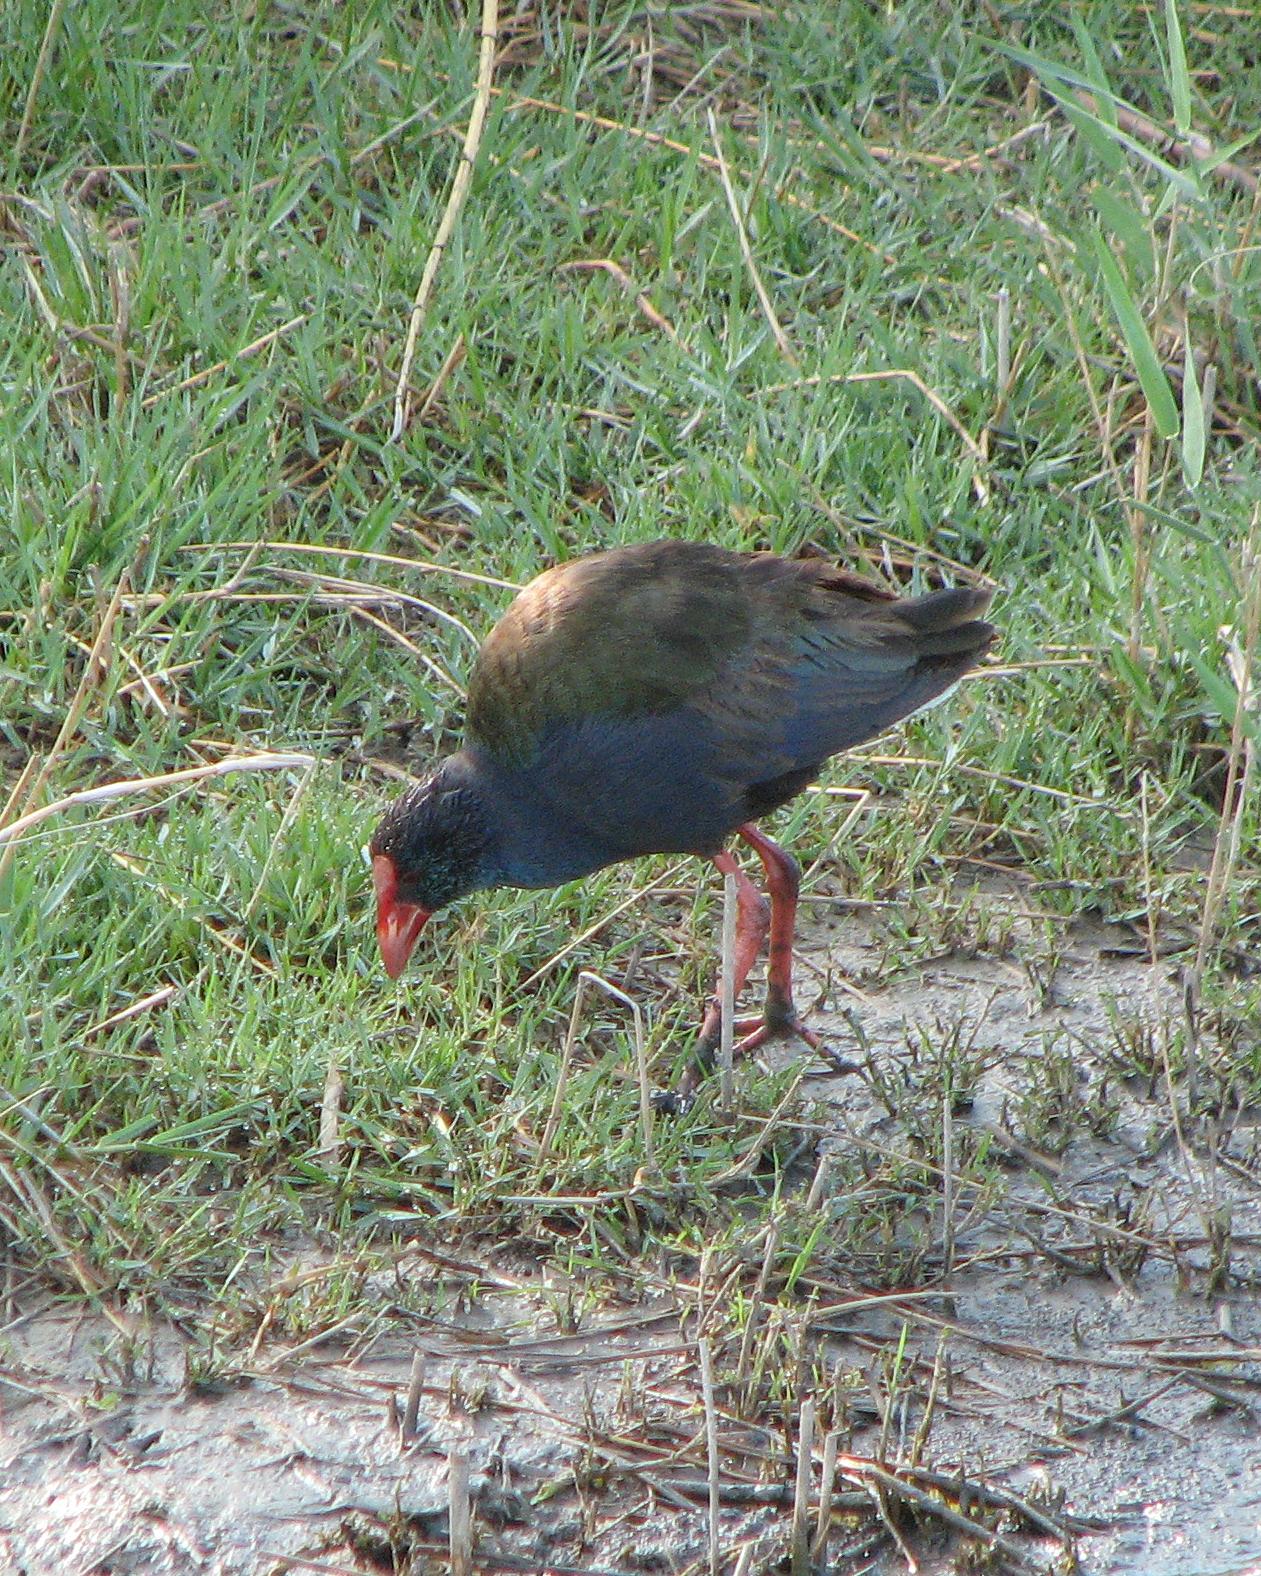 African Swamphen Photo by Henk Baptist